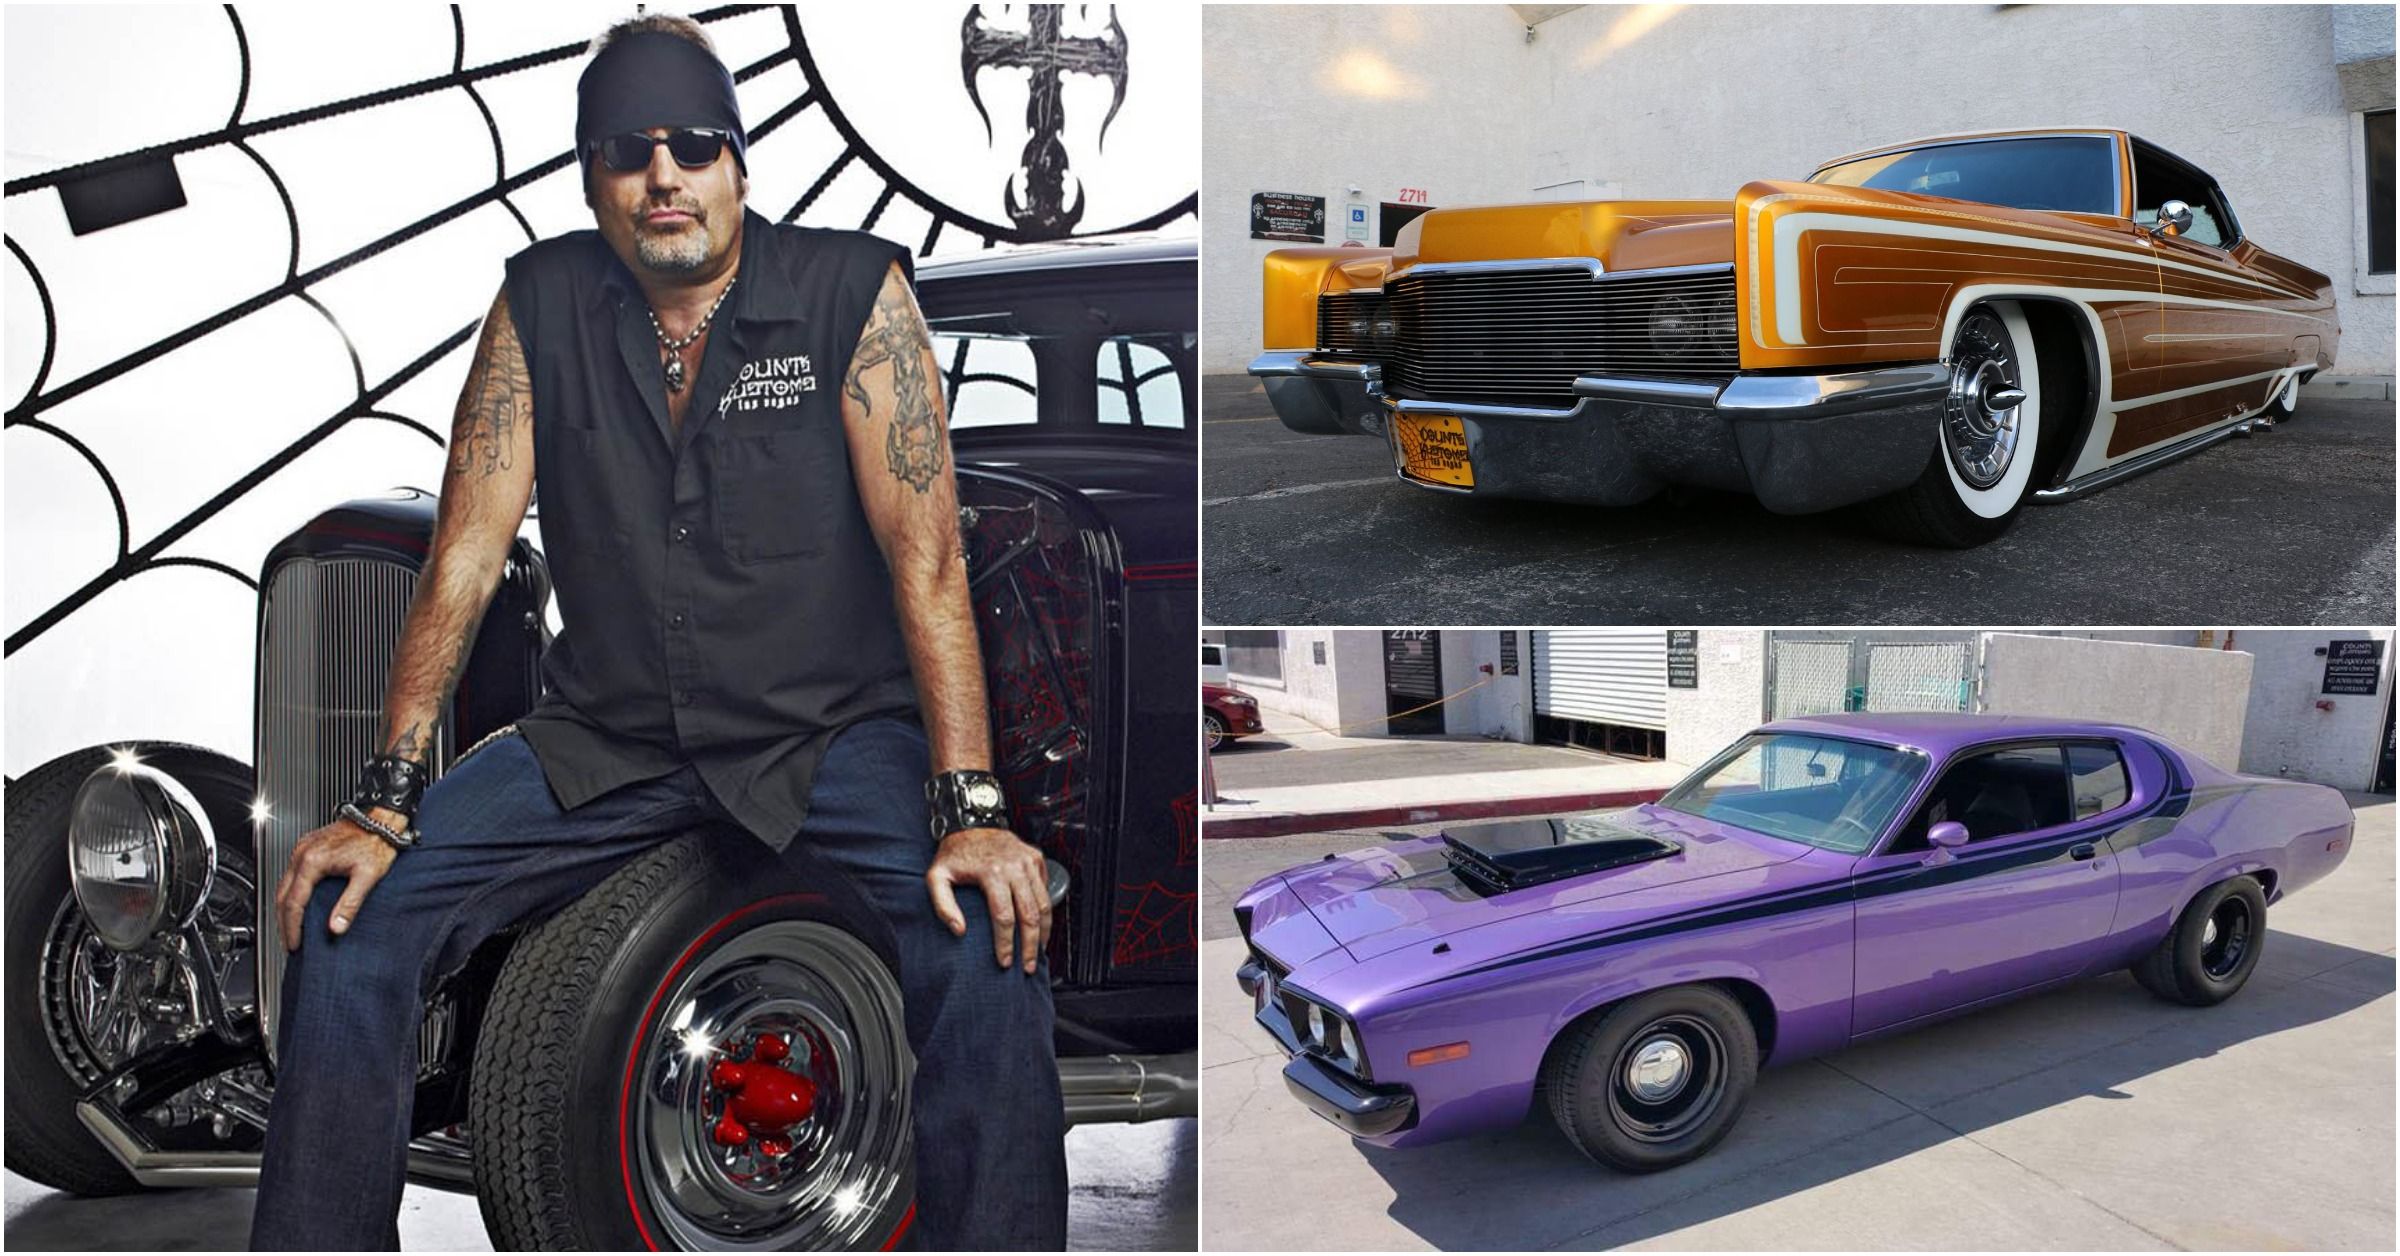 15 Of The Sickest Cars Danny Koker And The Count's Kustoms Crew Restored